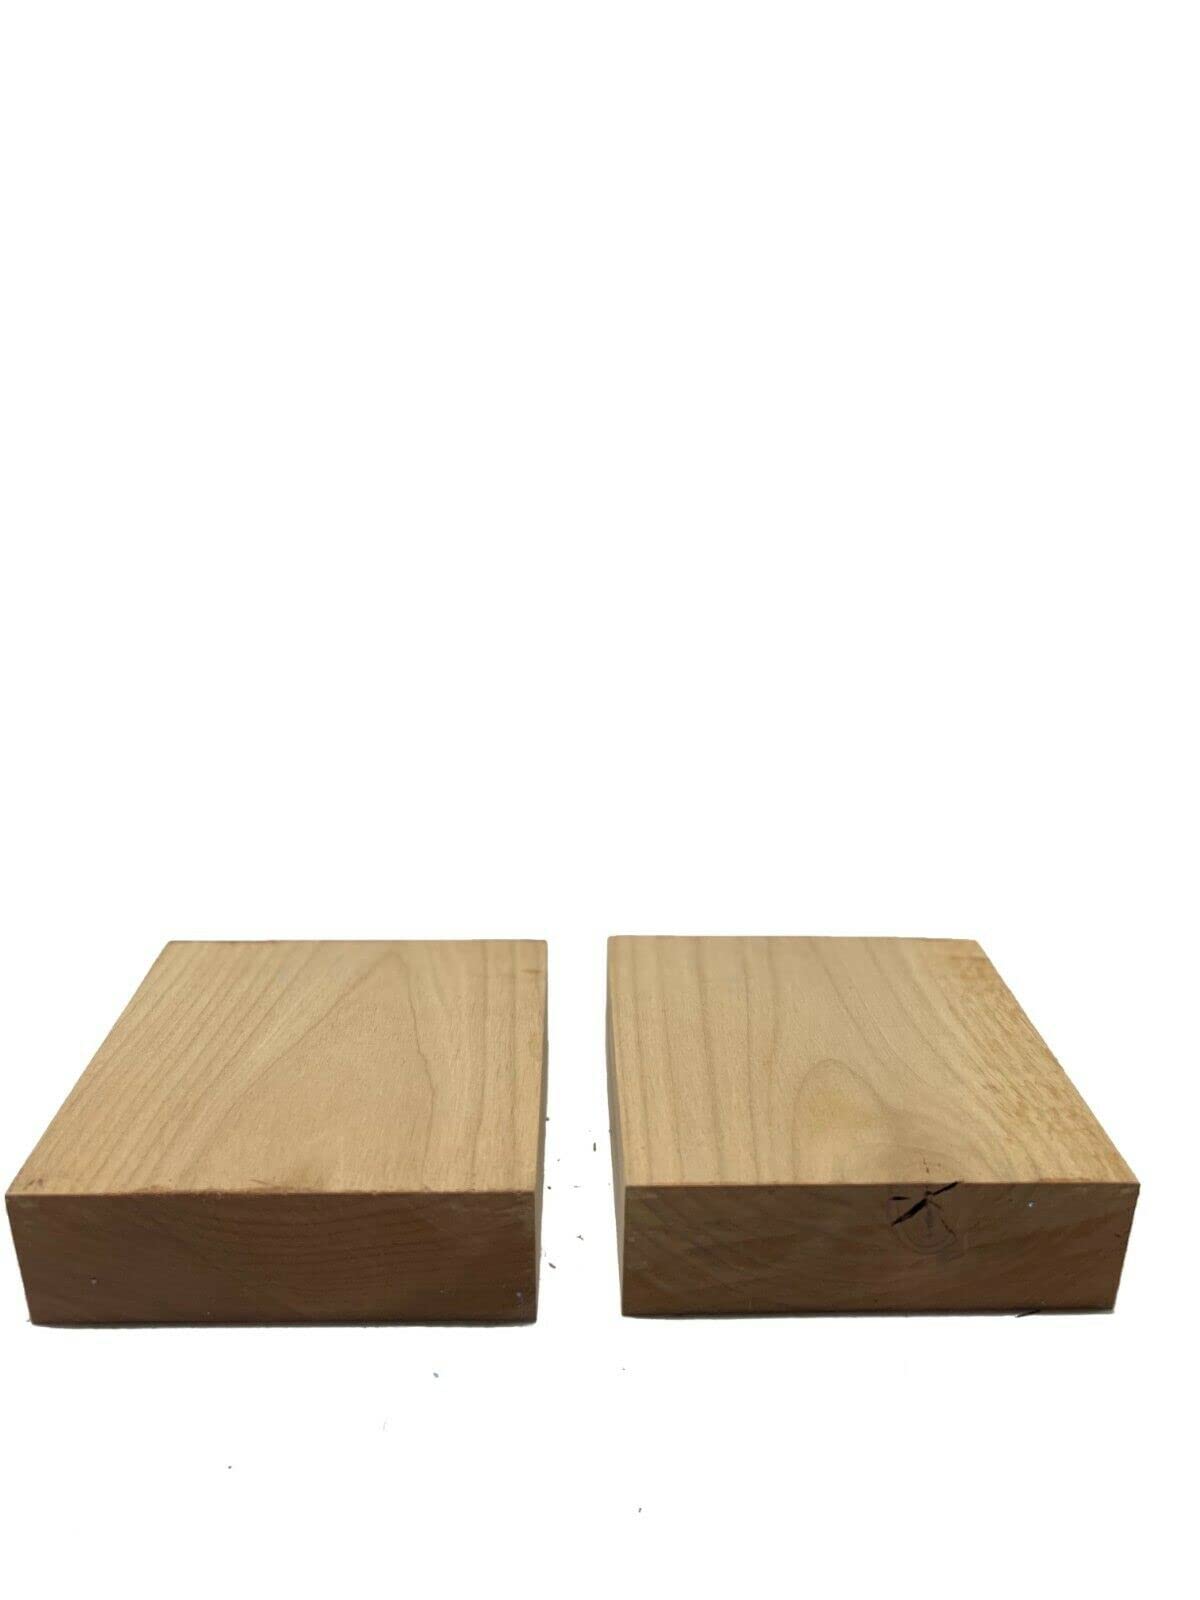 Pack of 2, Red Alder Turning Wood Blank Bowl Blanks Lathe, 6" X 6" X 2" Suitable Wood Pieces for Wood Crafts and Projects